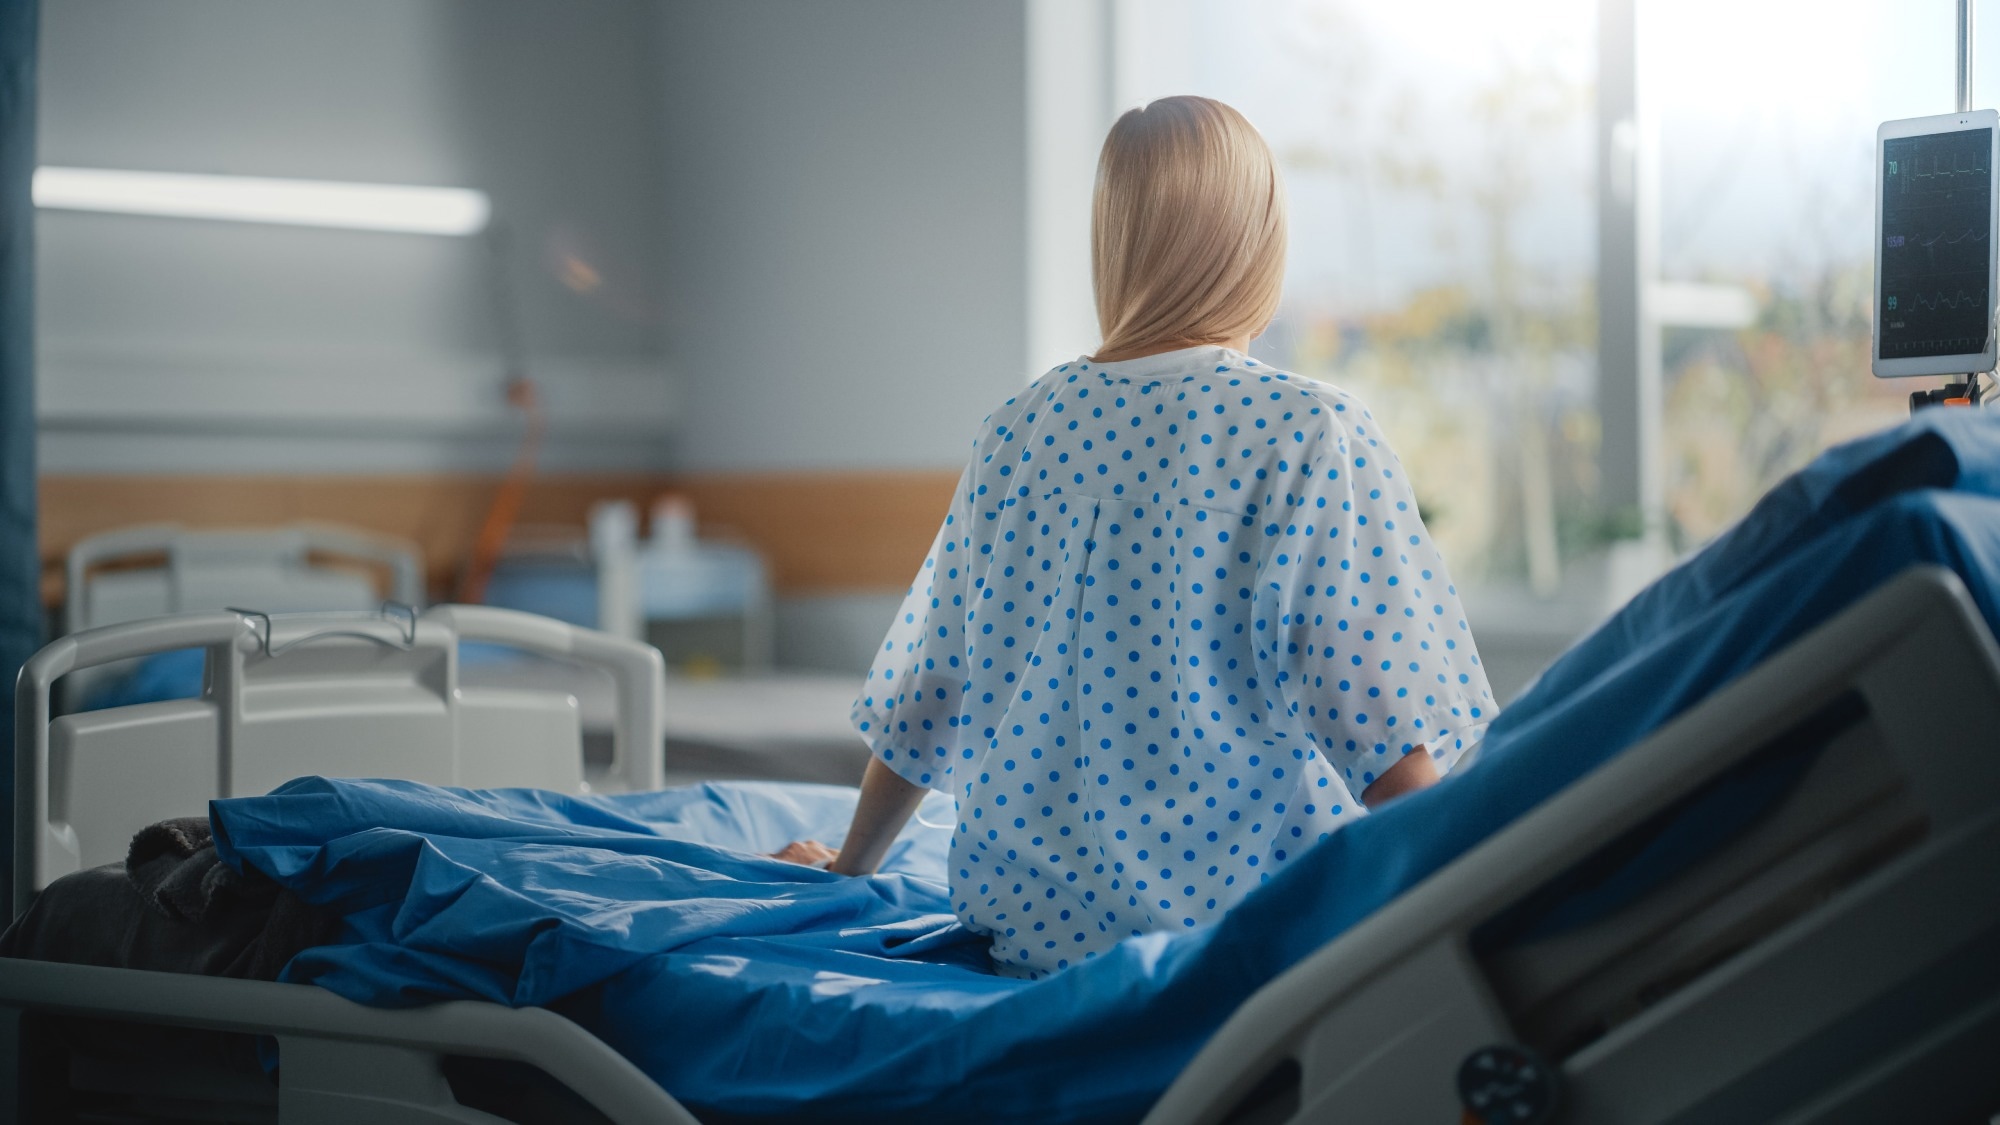 Study: Impact of the COVID-19 pandemic on the incidence and types of infections in hospitalized patients with cirrhosis: a retrospective study.  Image credit: Gorodenkoff/Shutterstock.com